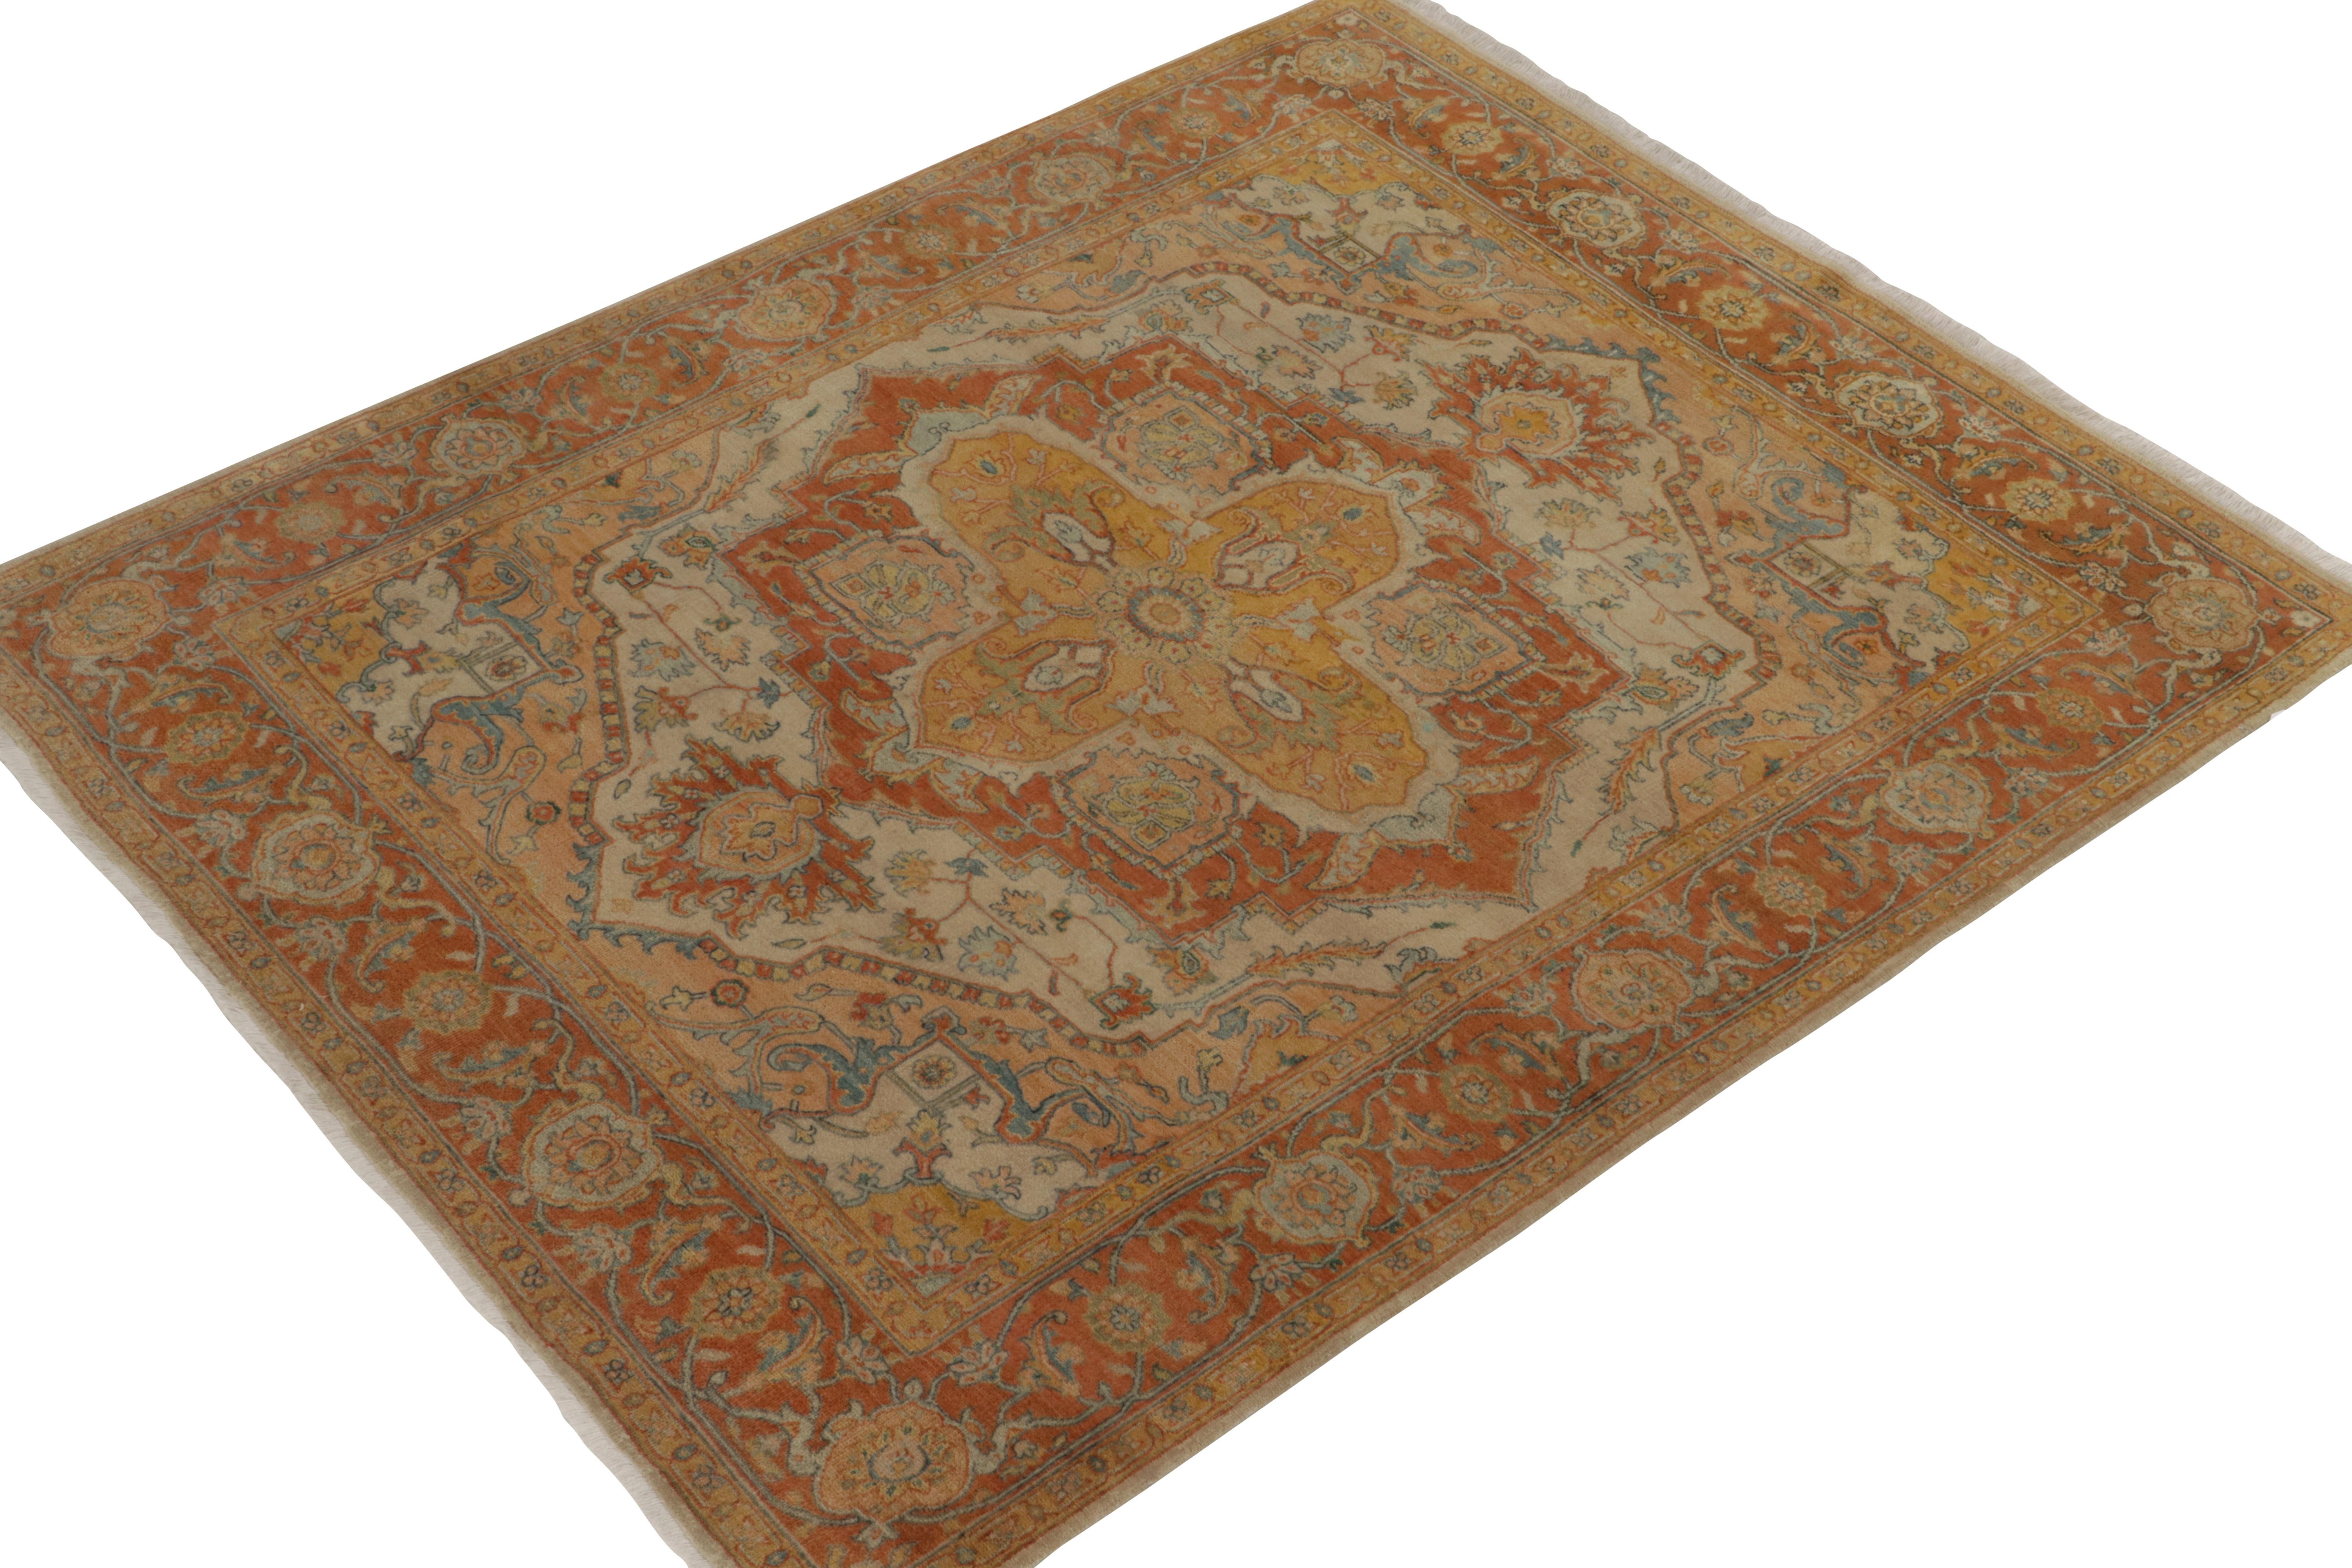 Hand-knotted in wool, this 5x7 from our Modern Classics collection draws inspiration from coveted antique Heriz Persian rugs. 

On the Design: Floral patterns enfold a regal medallion in gold and red, exemplary of the warmth and gravity of Heriz